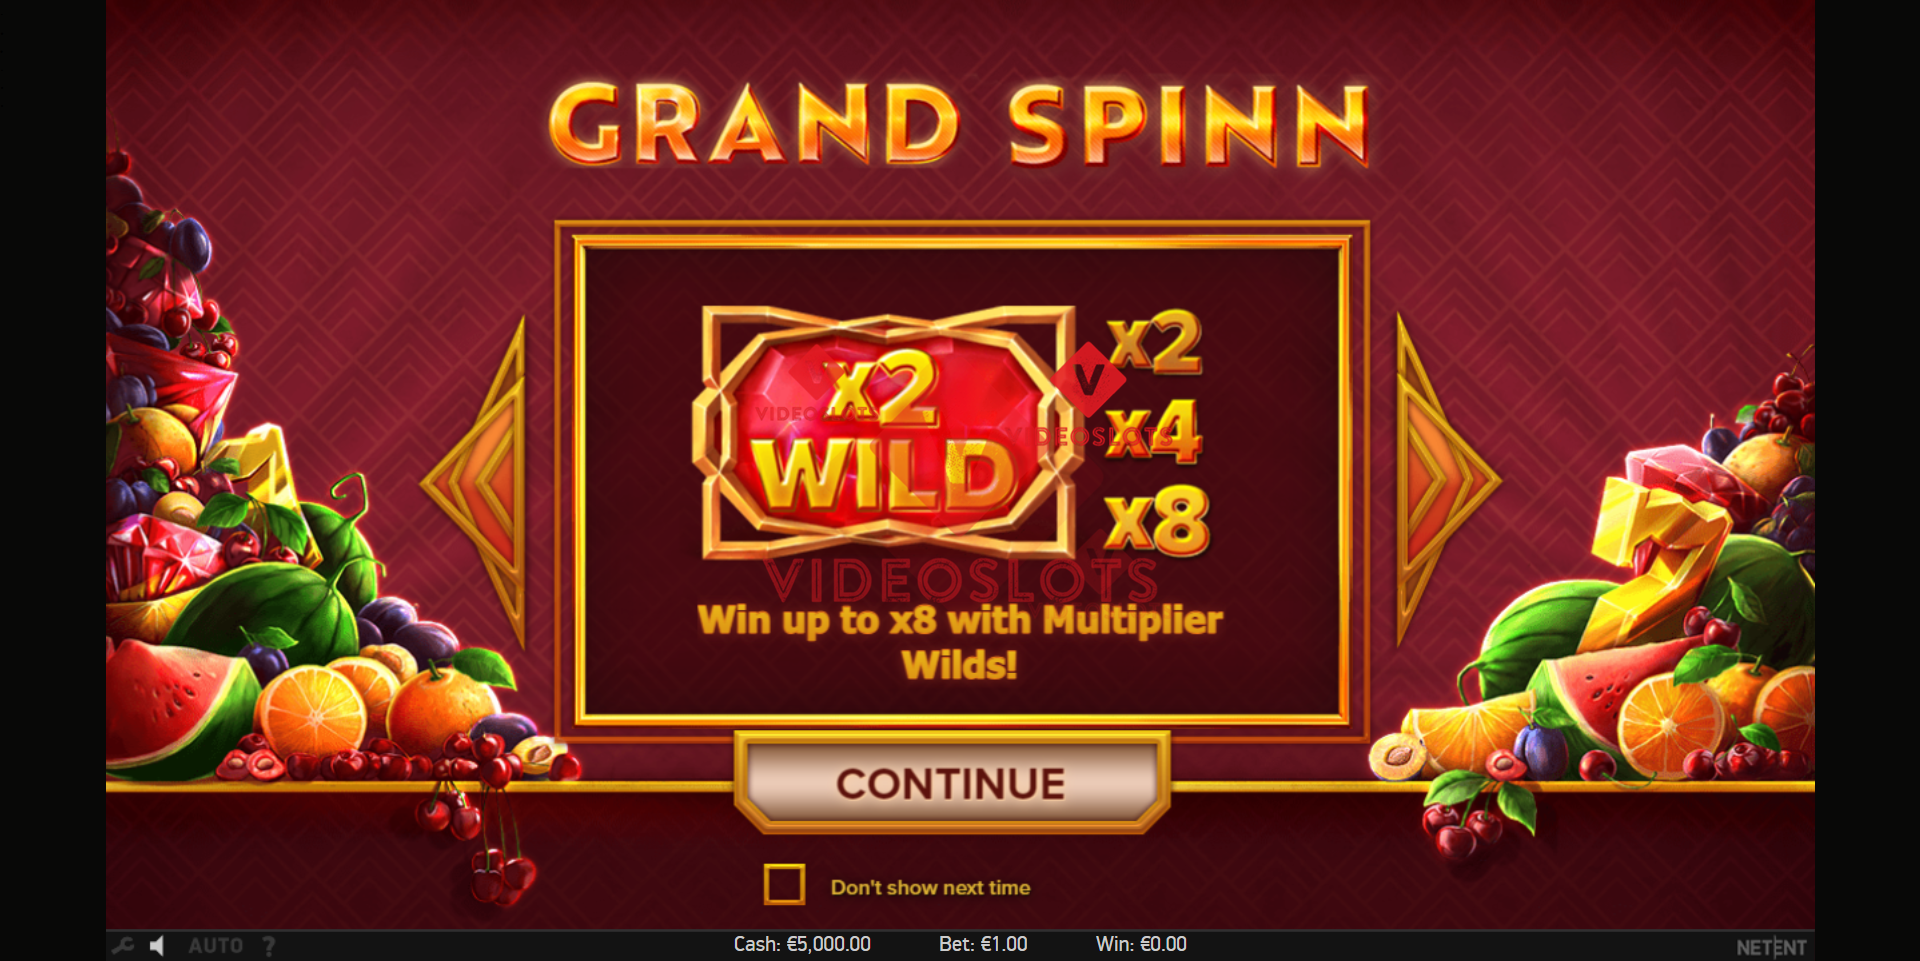 Game Intro for Grand Spinn slot from NetEnt